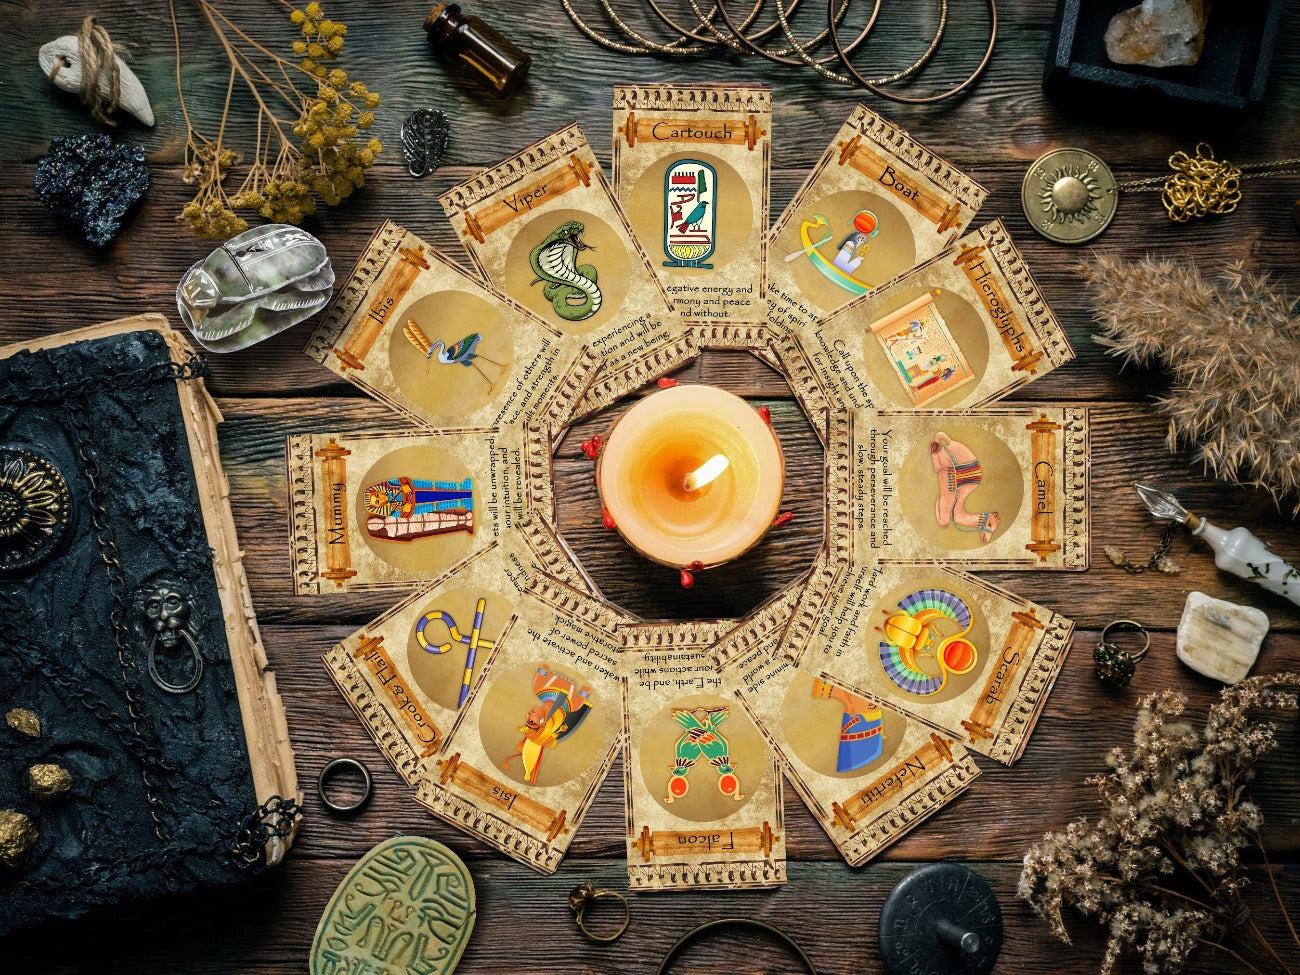 Egyptian Oracle cards are placed in a circle around a lit candle on a wooden altar.